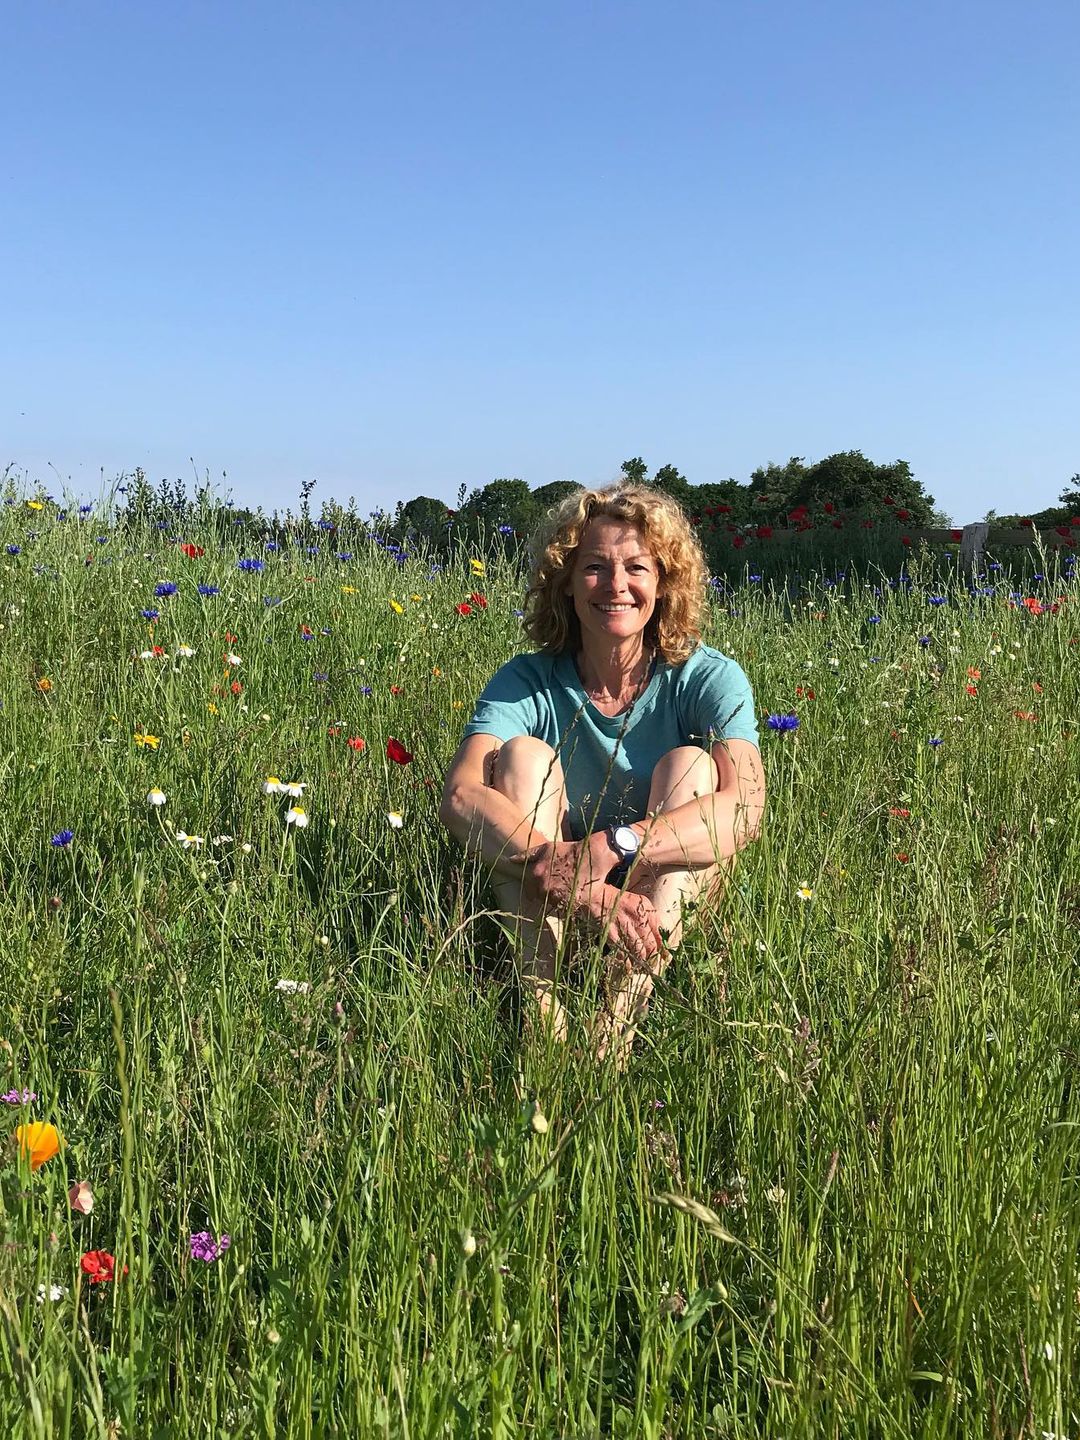 Kate Humble sitting in a field of flowers